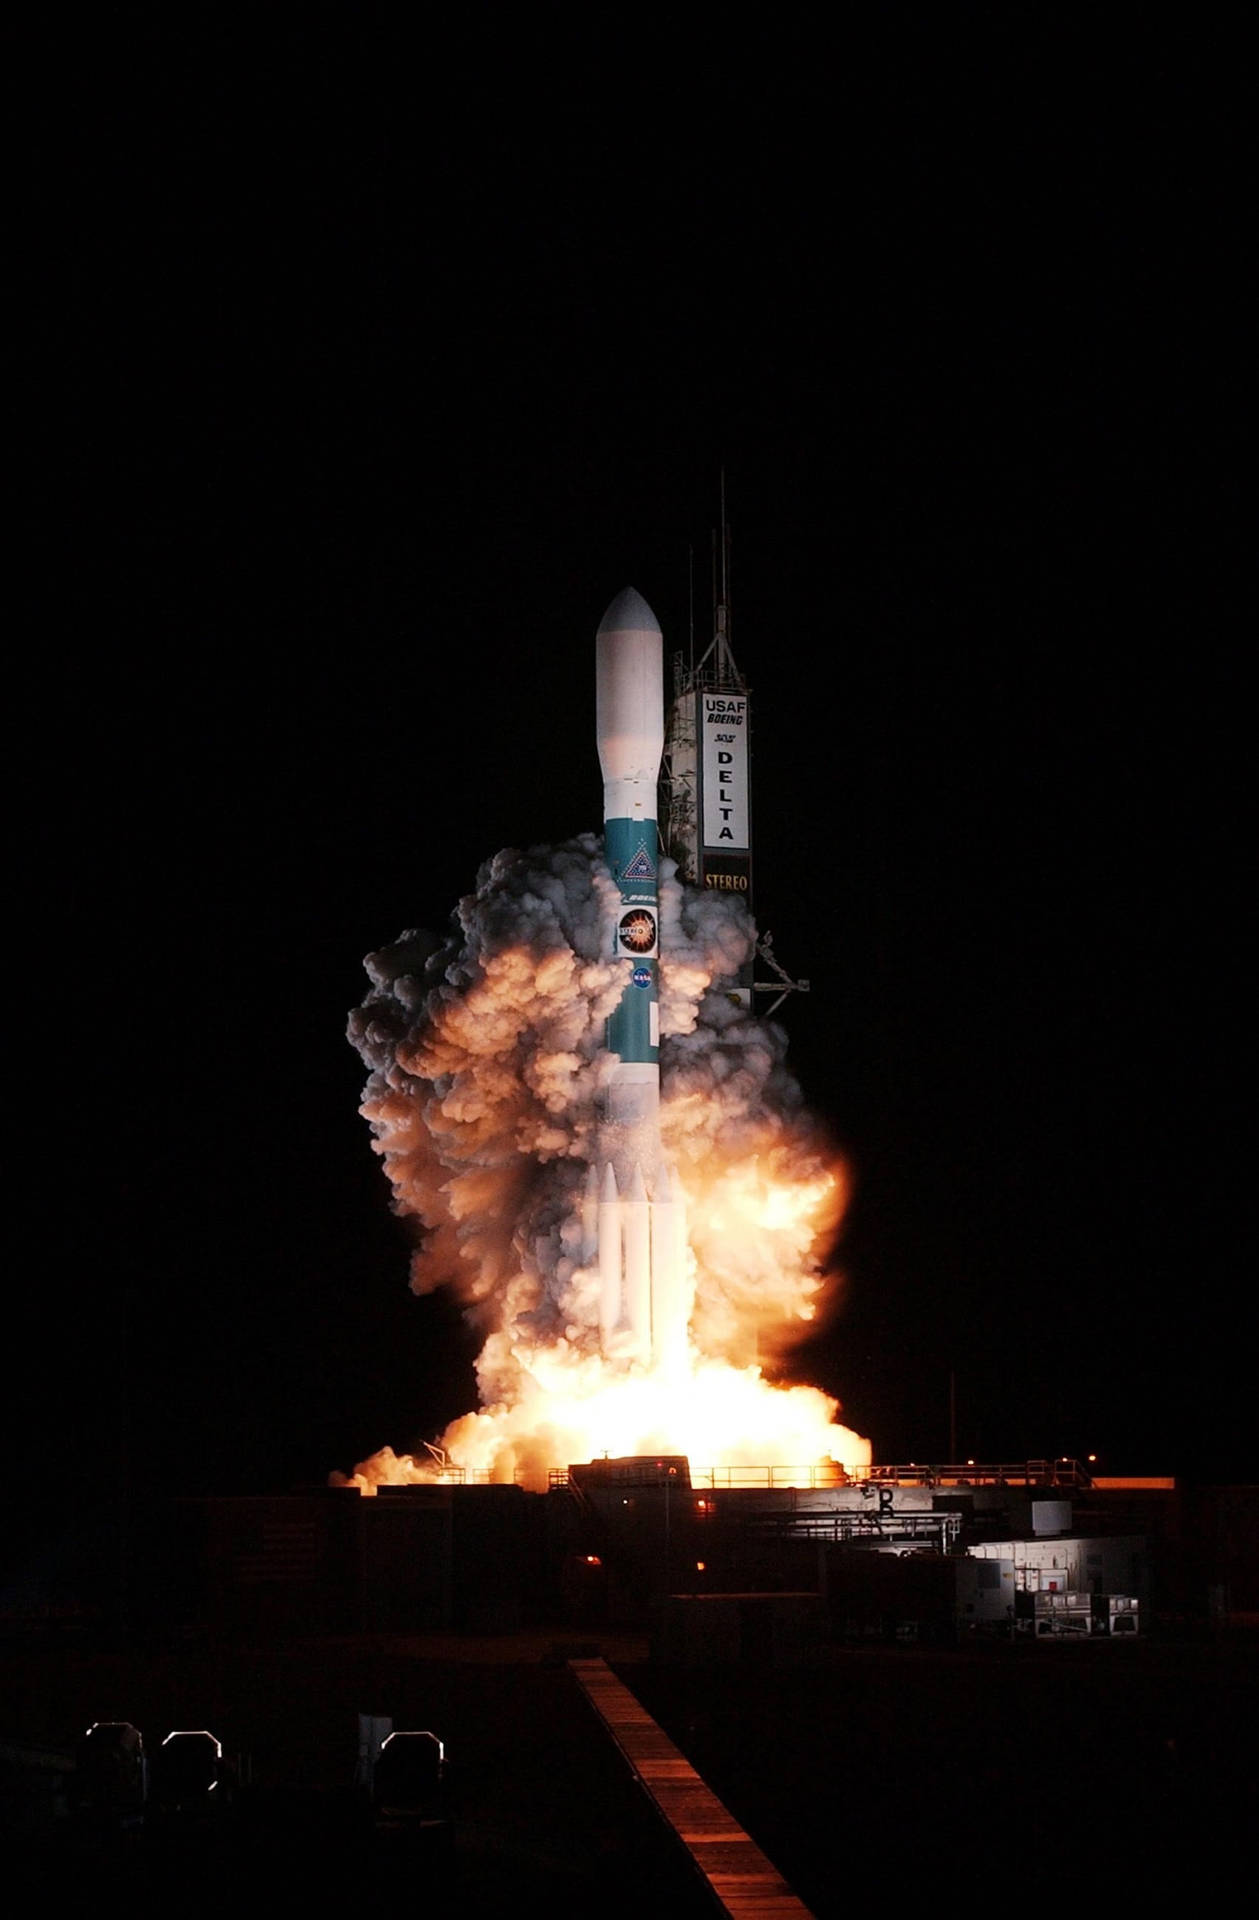 Ignition Of High-temperature Rocket Fuel Background